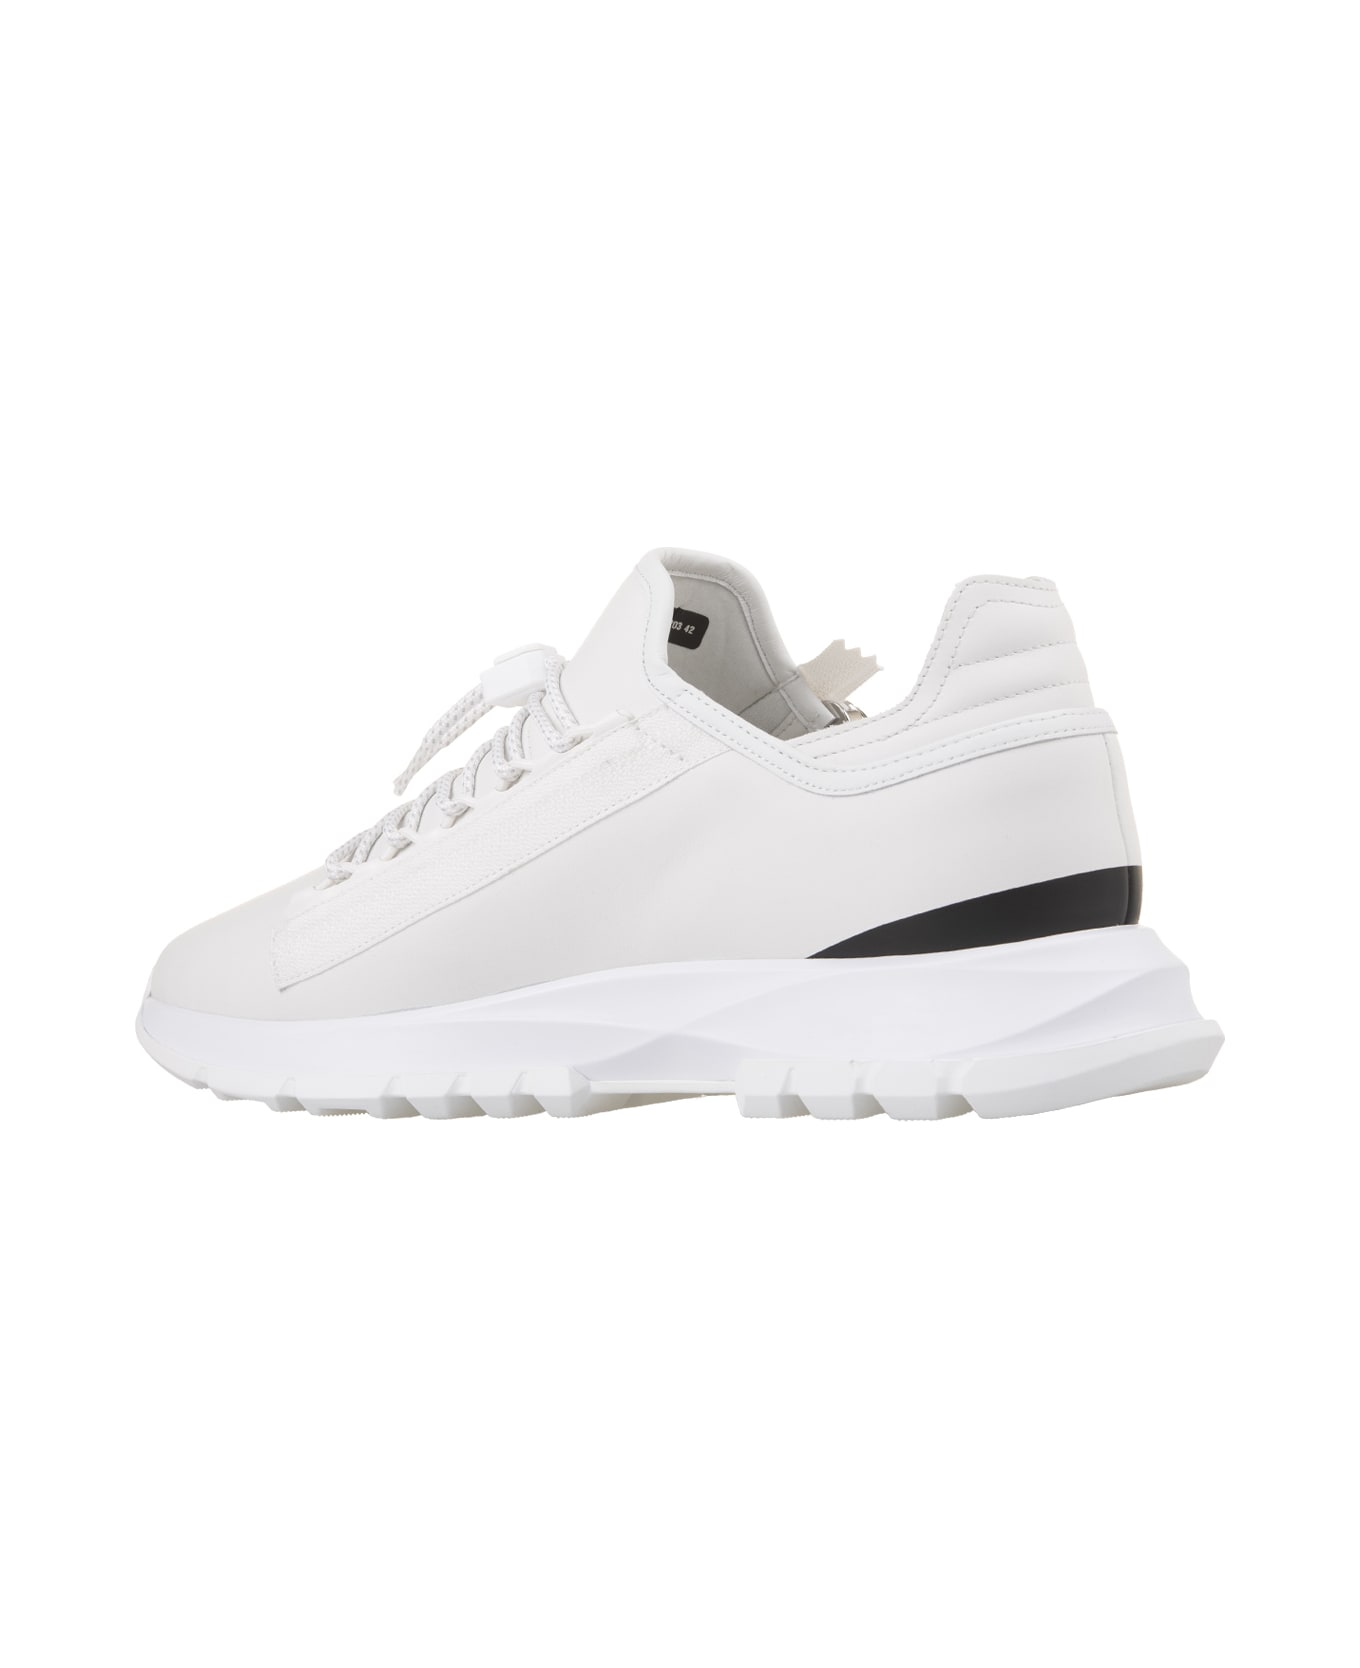 Givenchy Specter Running Sneakers In White Leather With Zip - White